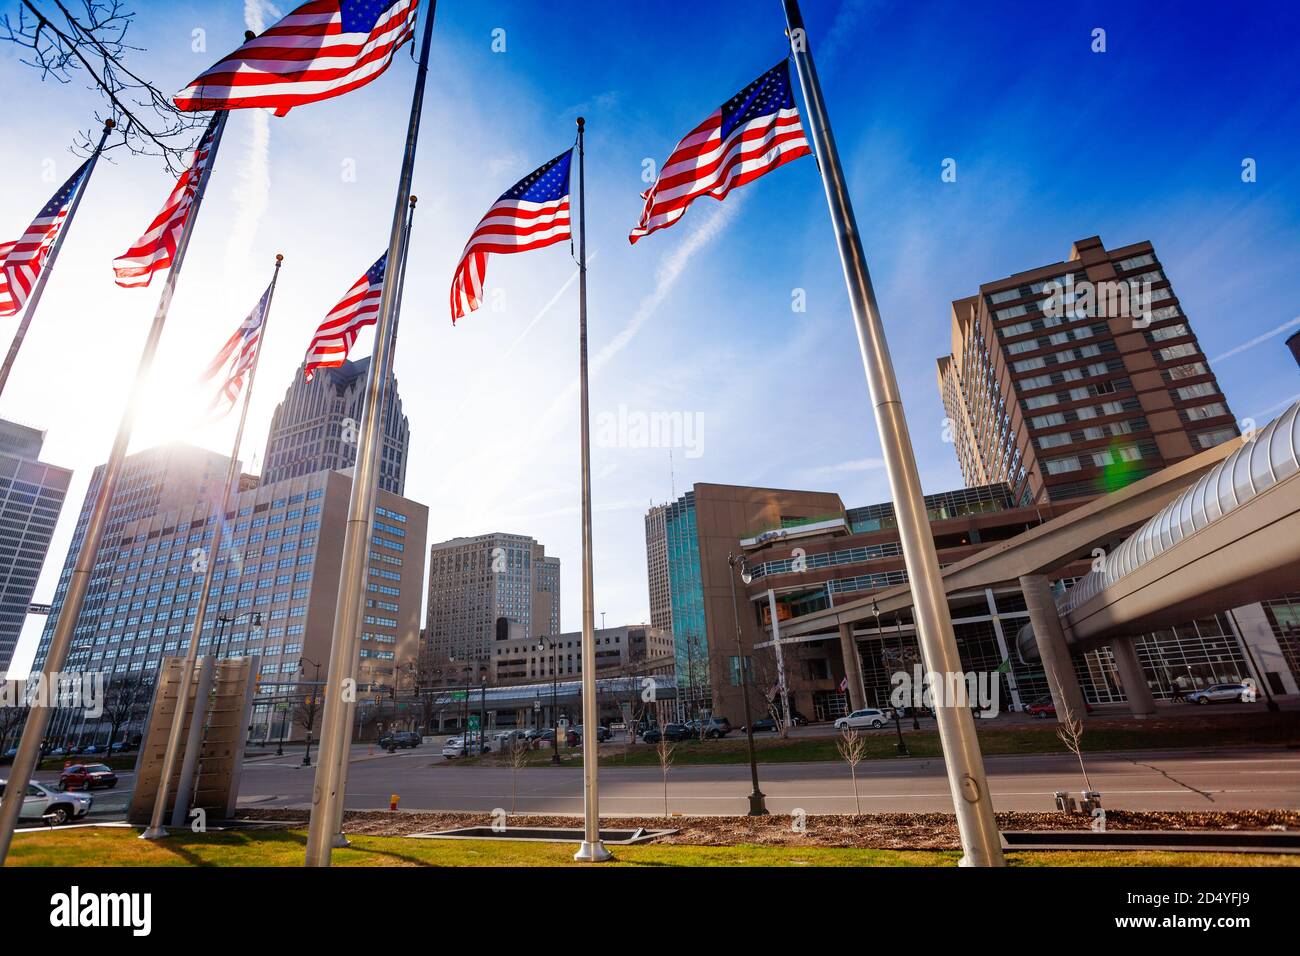 USA national flags poles on the Jefferson Avenue in Detroit, Michigan Stock Photo